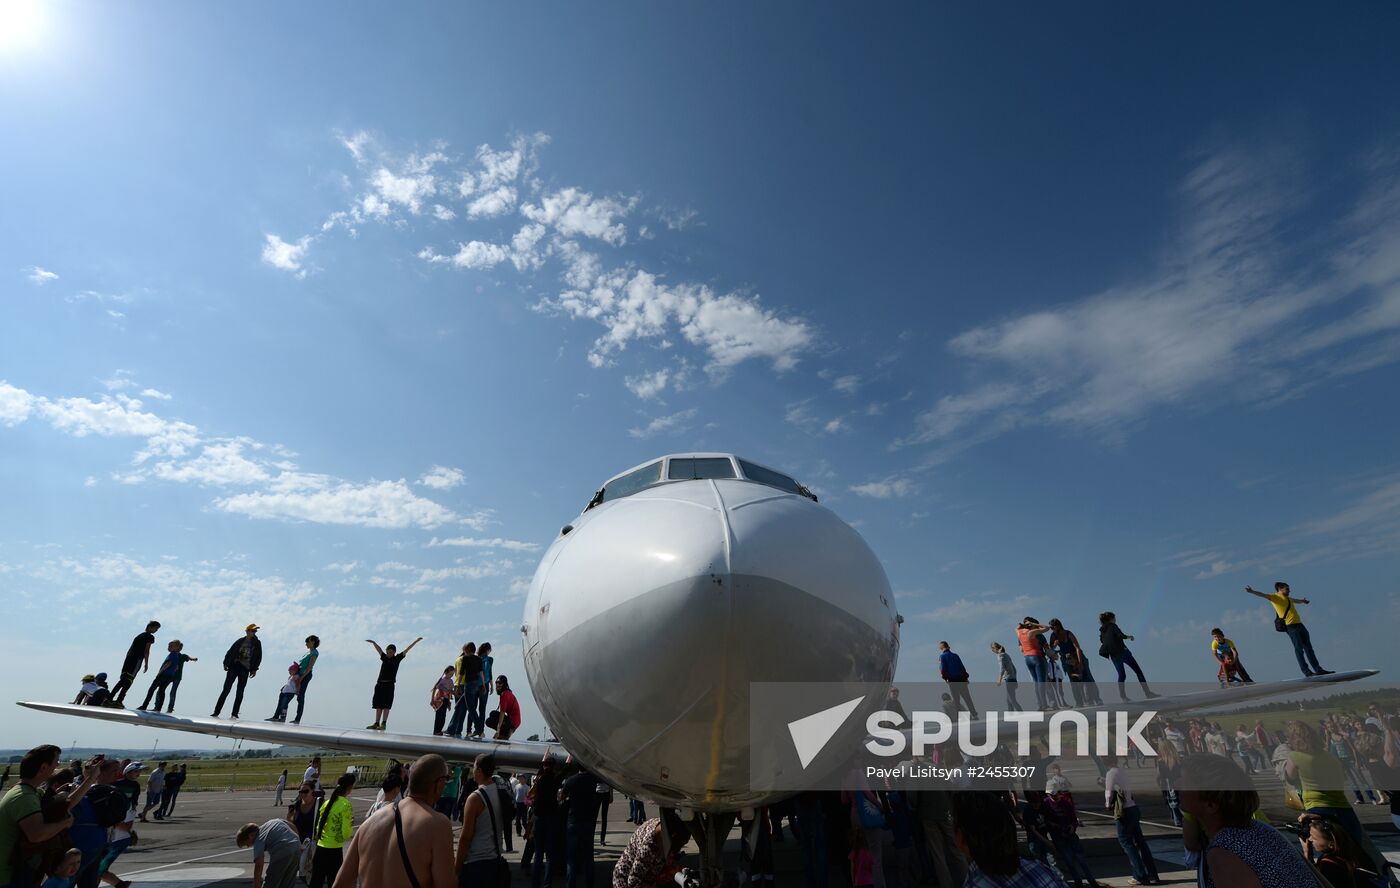 The Wings of Parma aviation festival in Perm